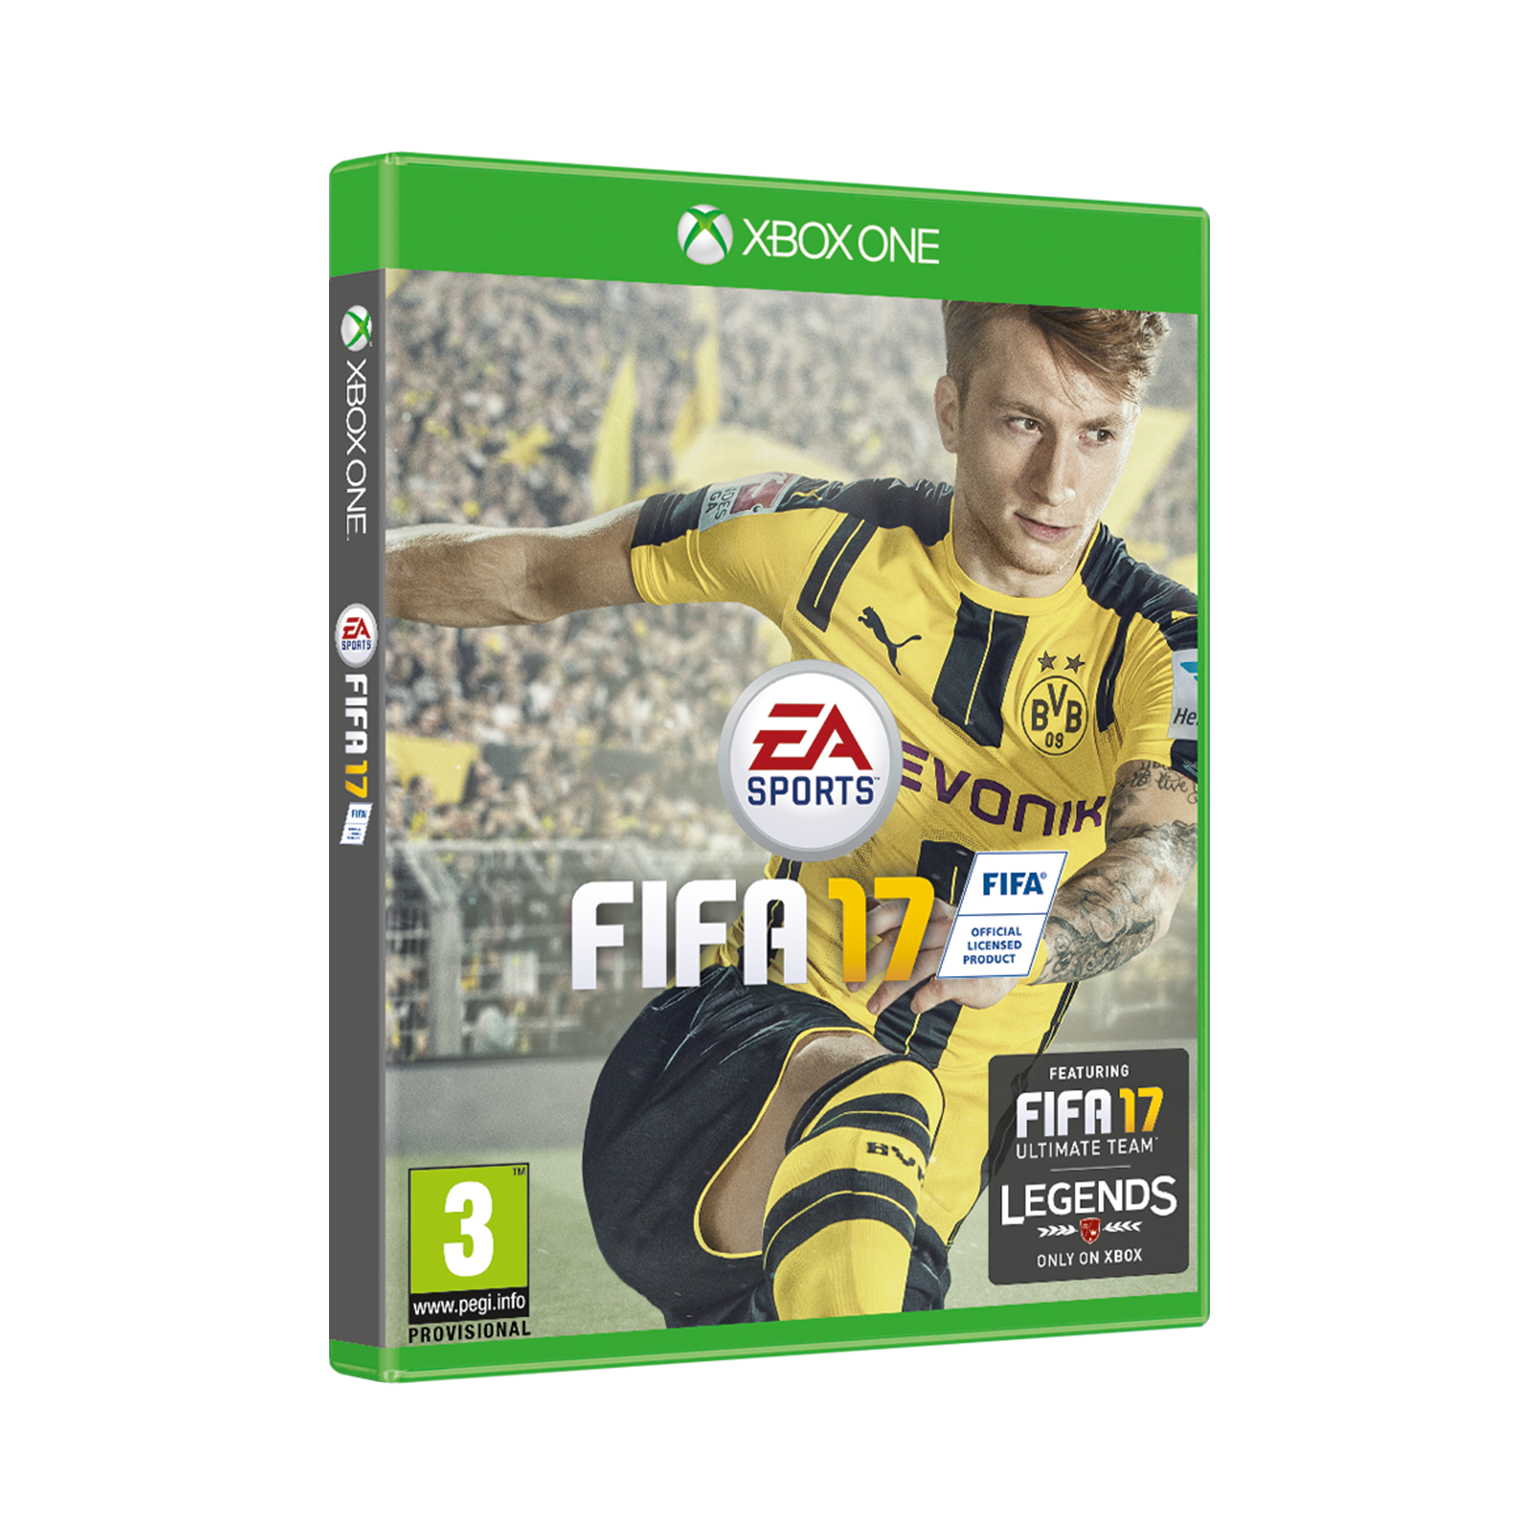 FIFA 17 Cover Vote Is Complete - EA SPORTS Official Site